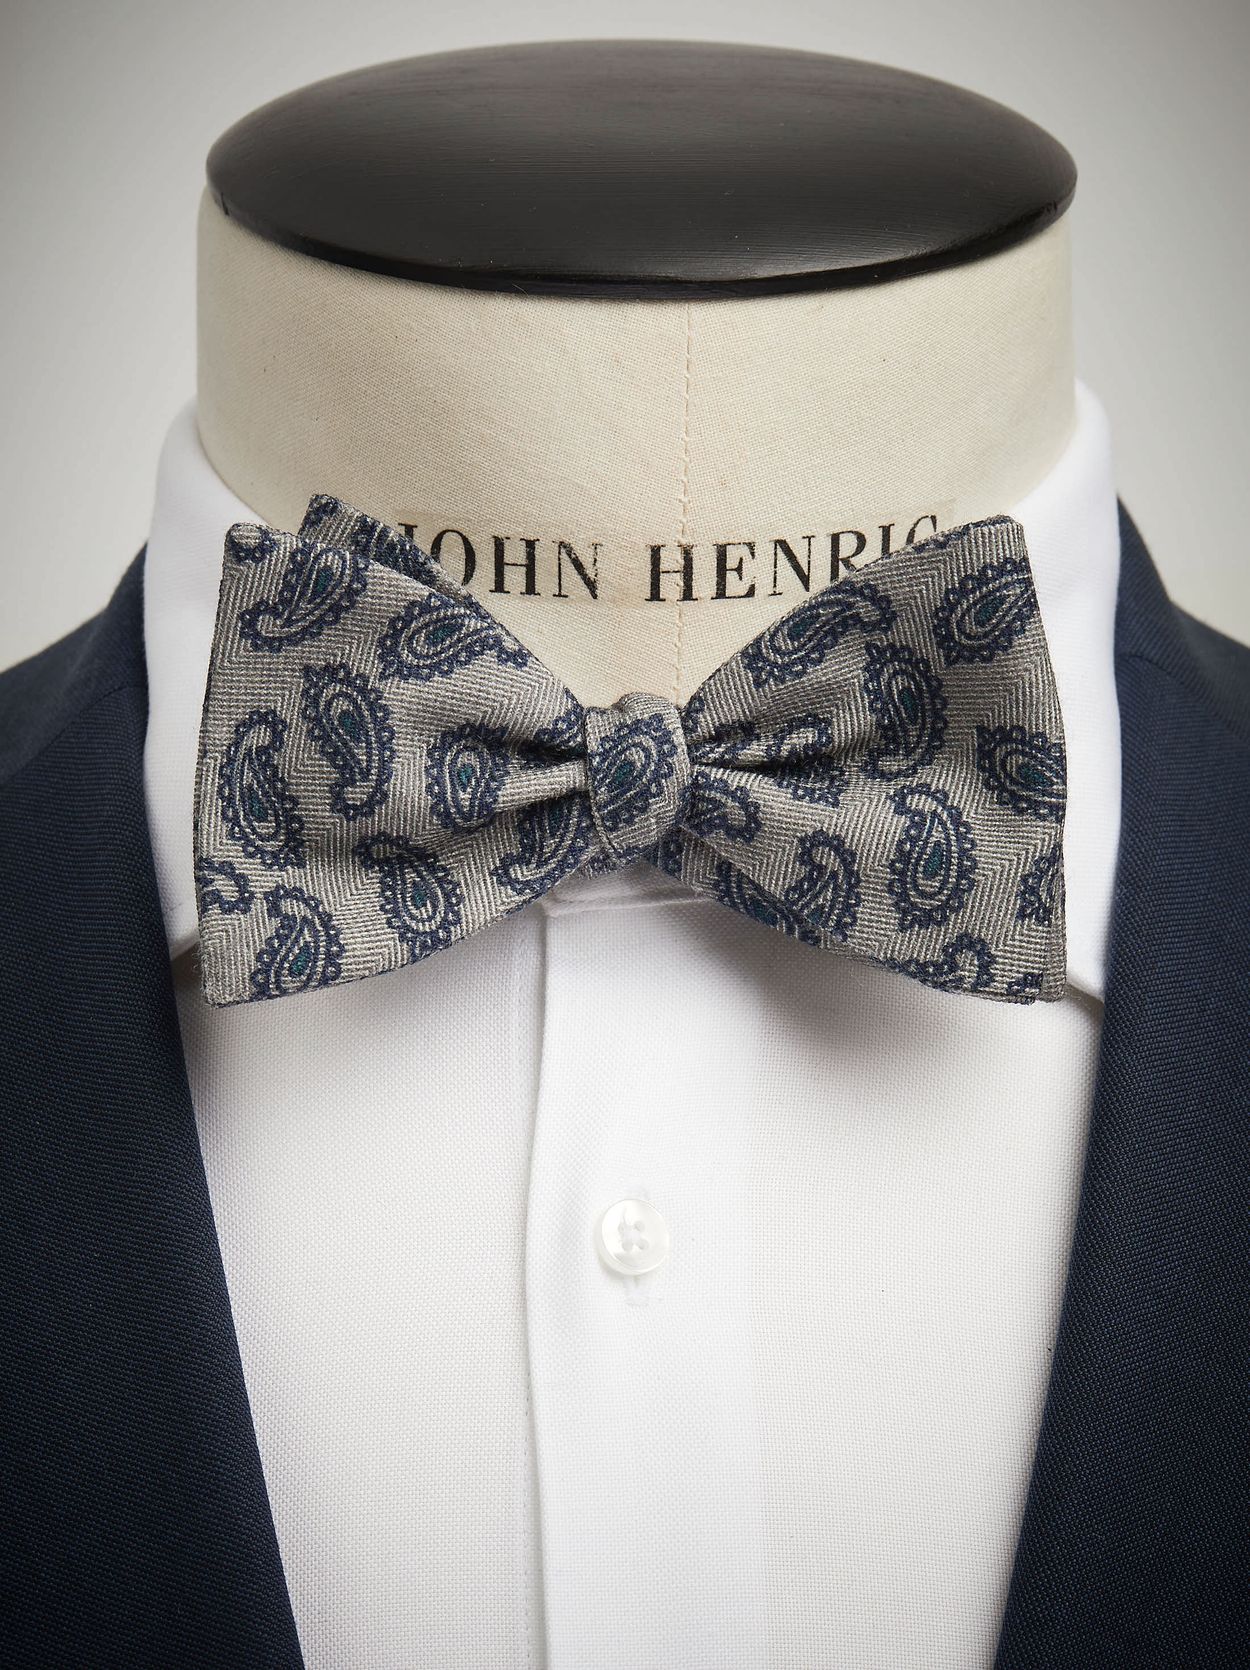 How to tie a bow tie? | John Henric